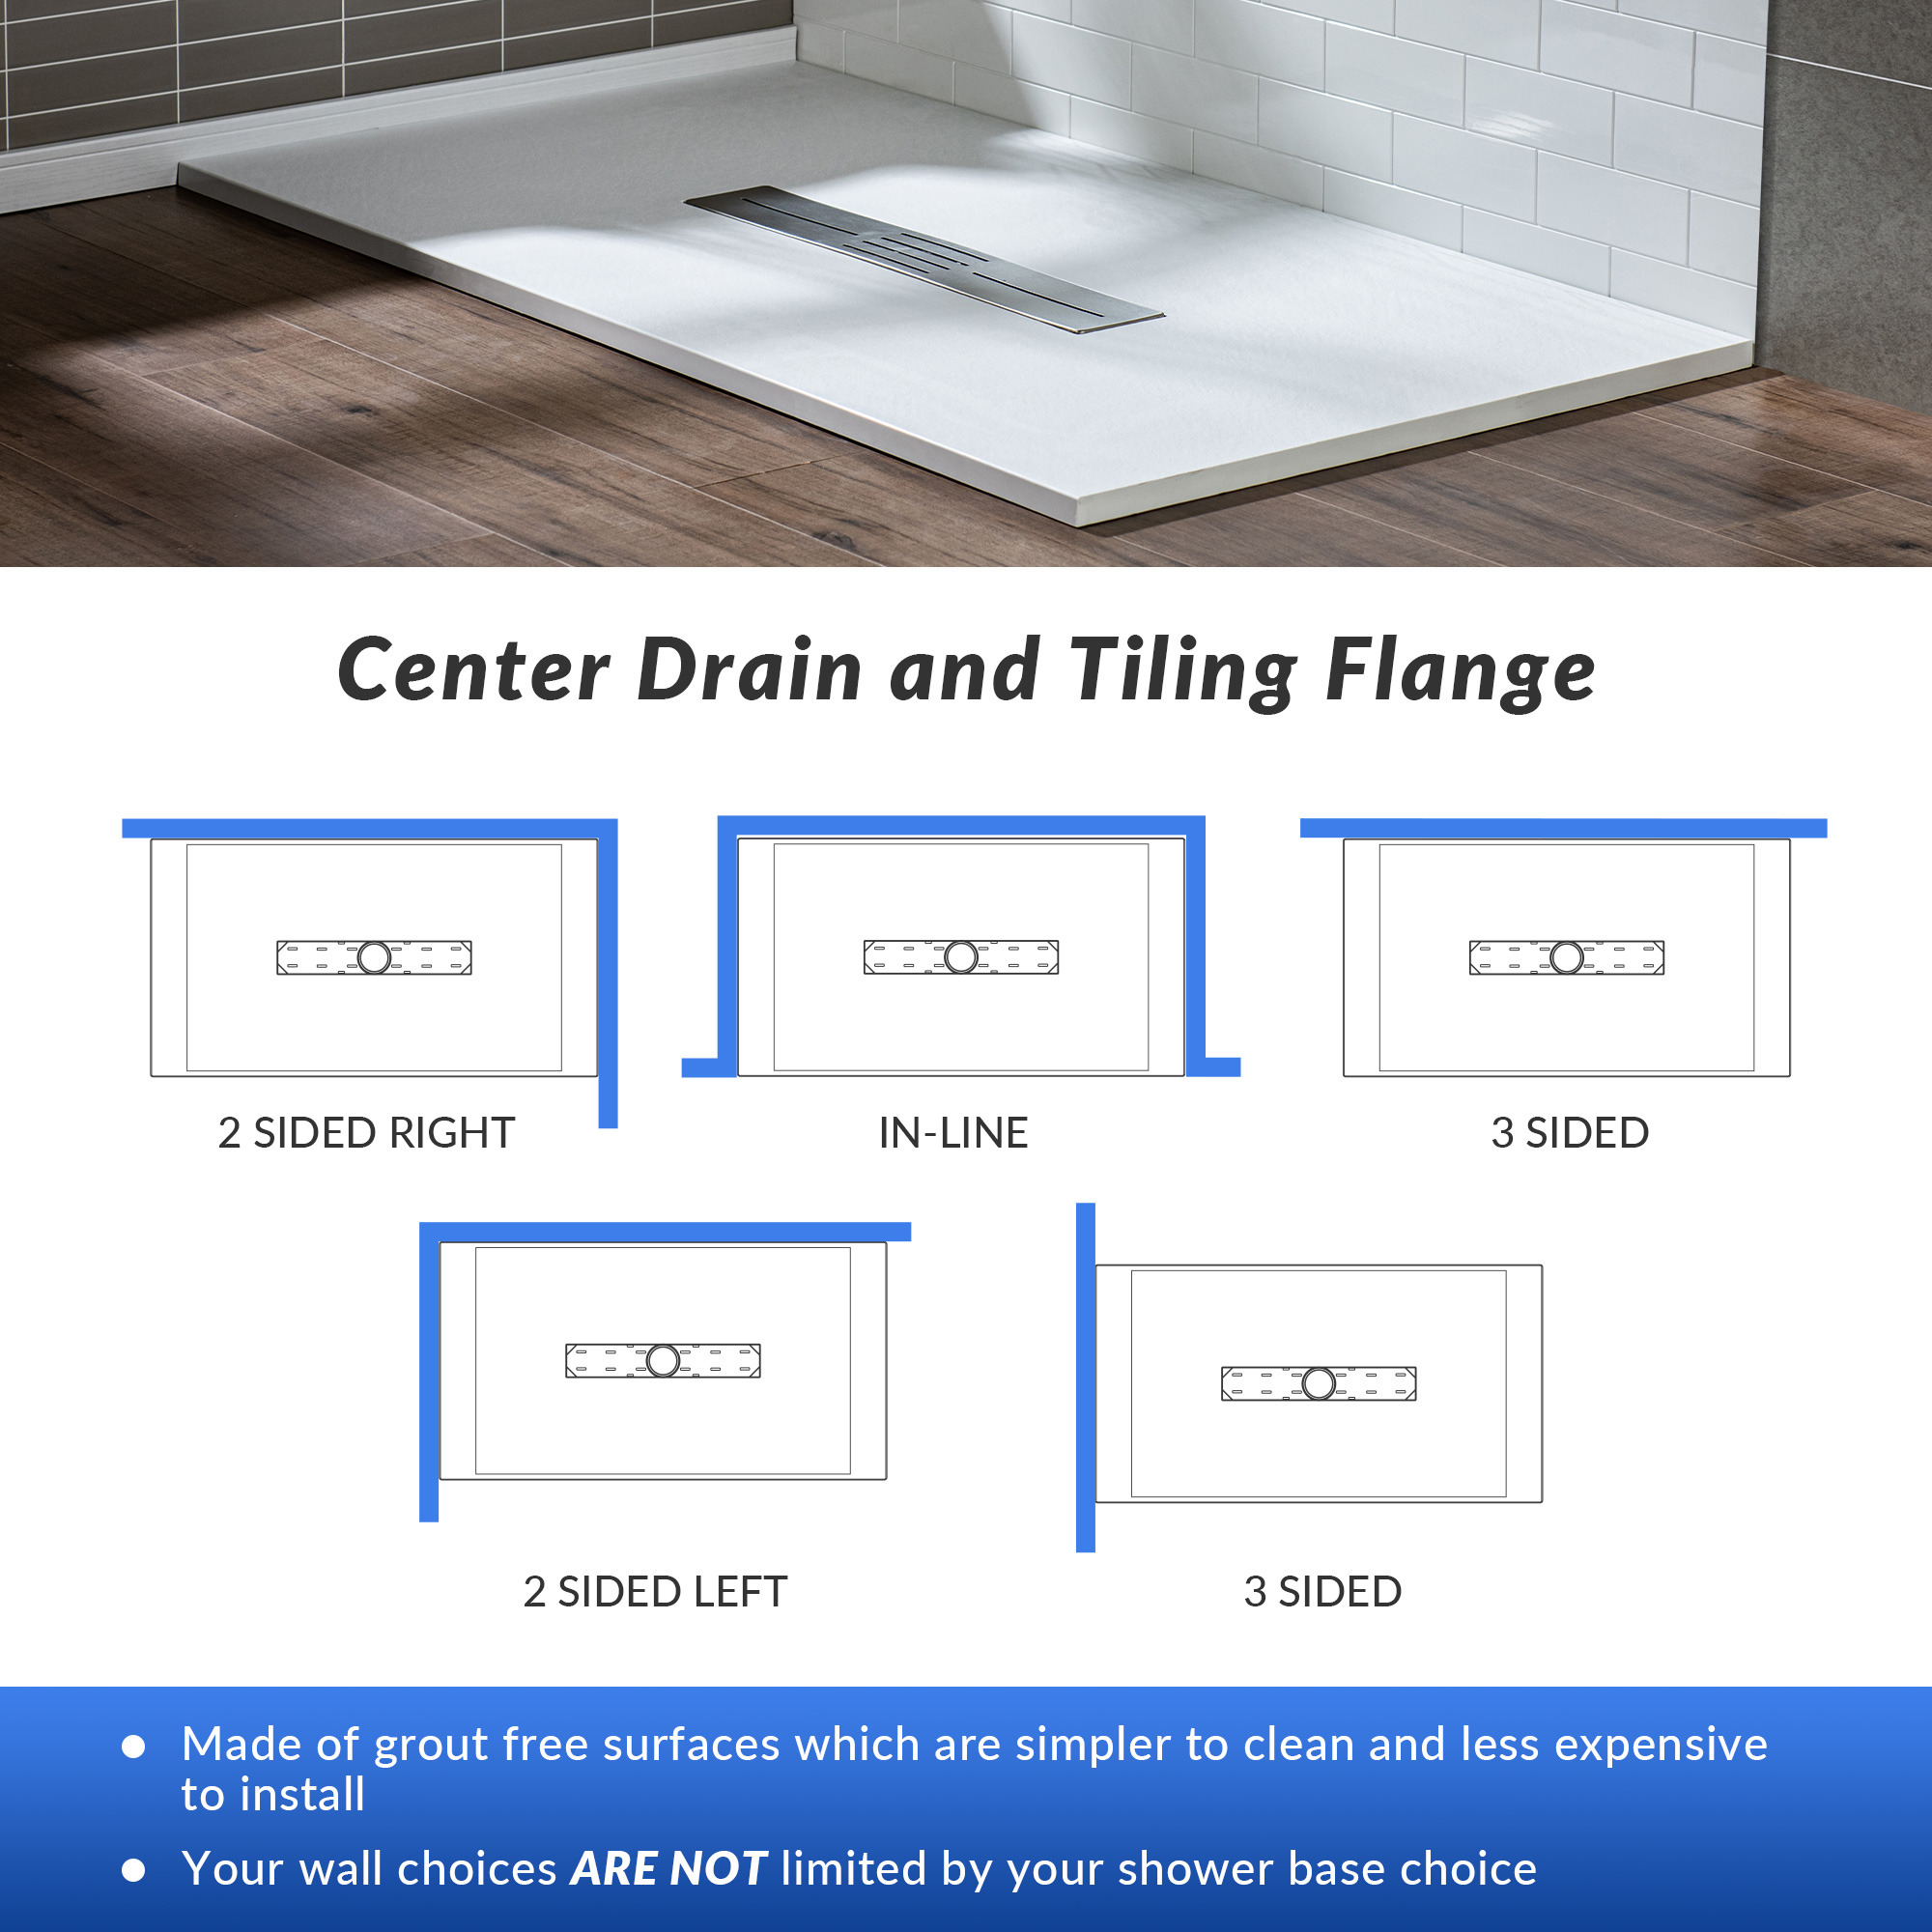  WOODBRIDGE 48-in L x 36-in W Zero Threshold End Drain Shower Base with Center Drain Placement, Matching Decorative Drain Plate and Tile Flange, Wheel Chair Access, Low Profile, White_15112